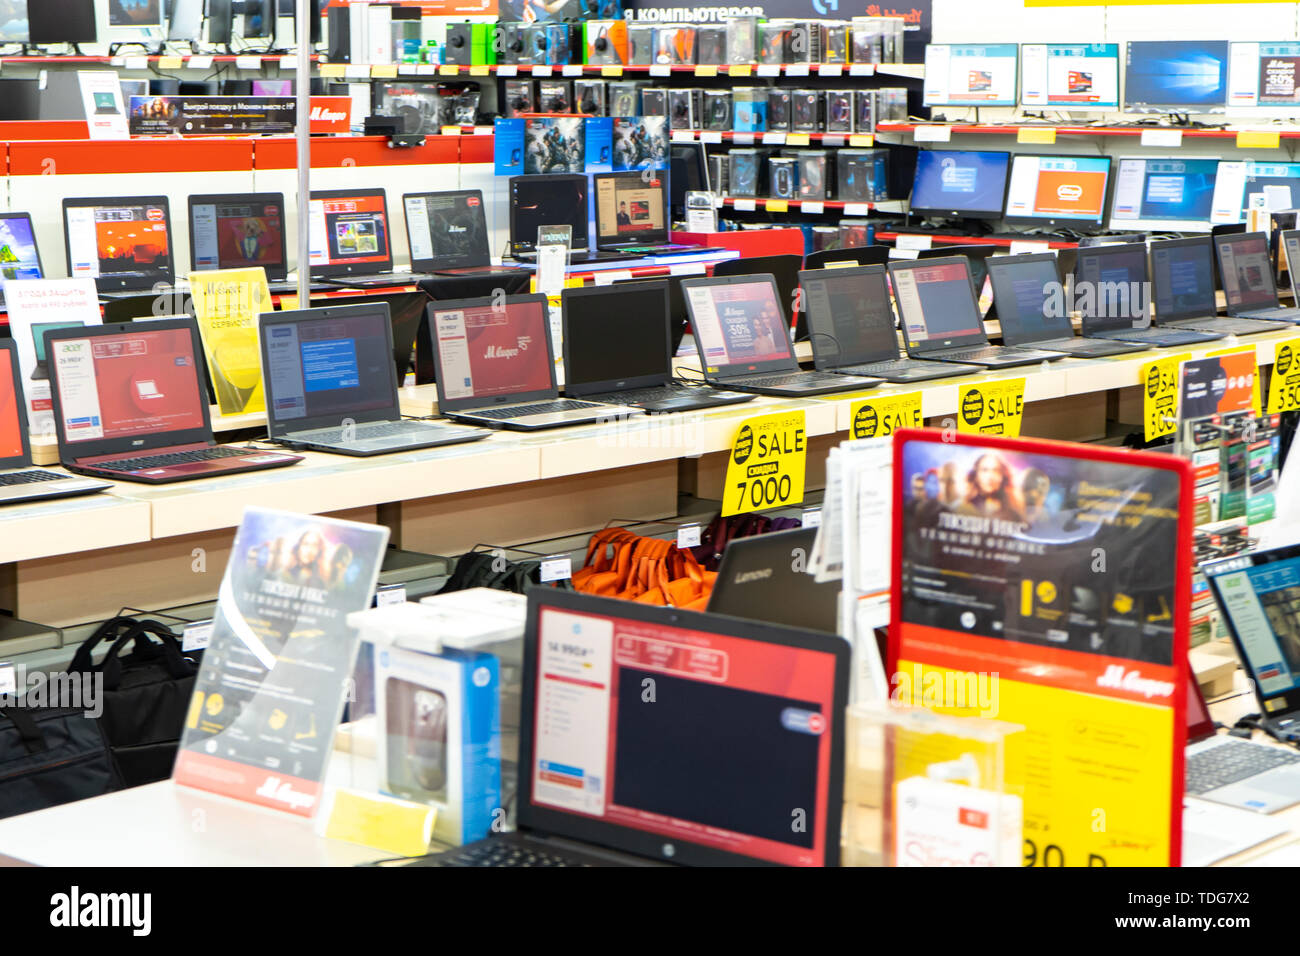 Chelyabinsk Region, Russia - June 2019. Household electrical appliances store M Video. Shelving with goods. Computers and laptops. Stock Photo